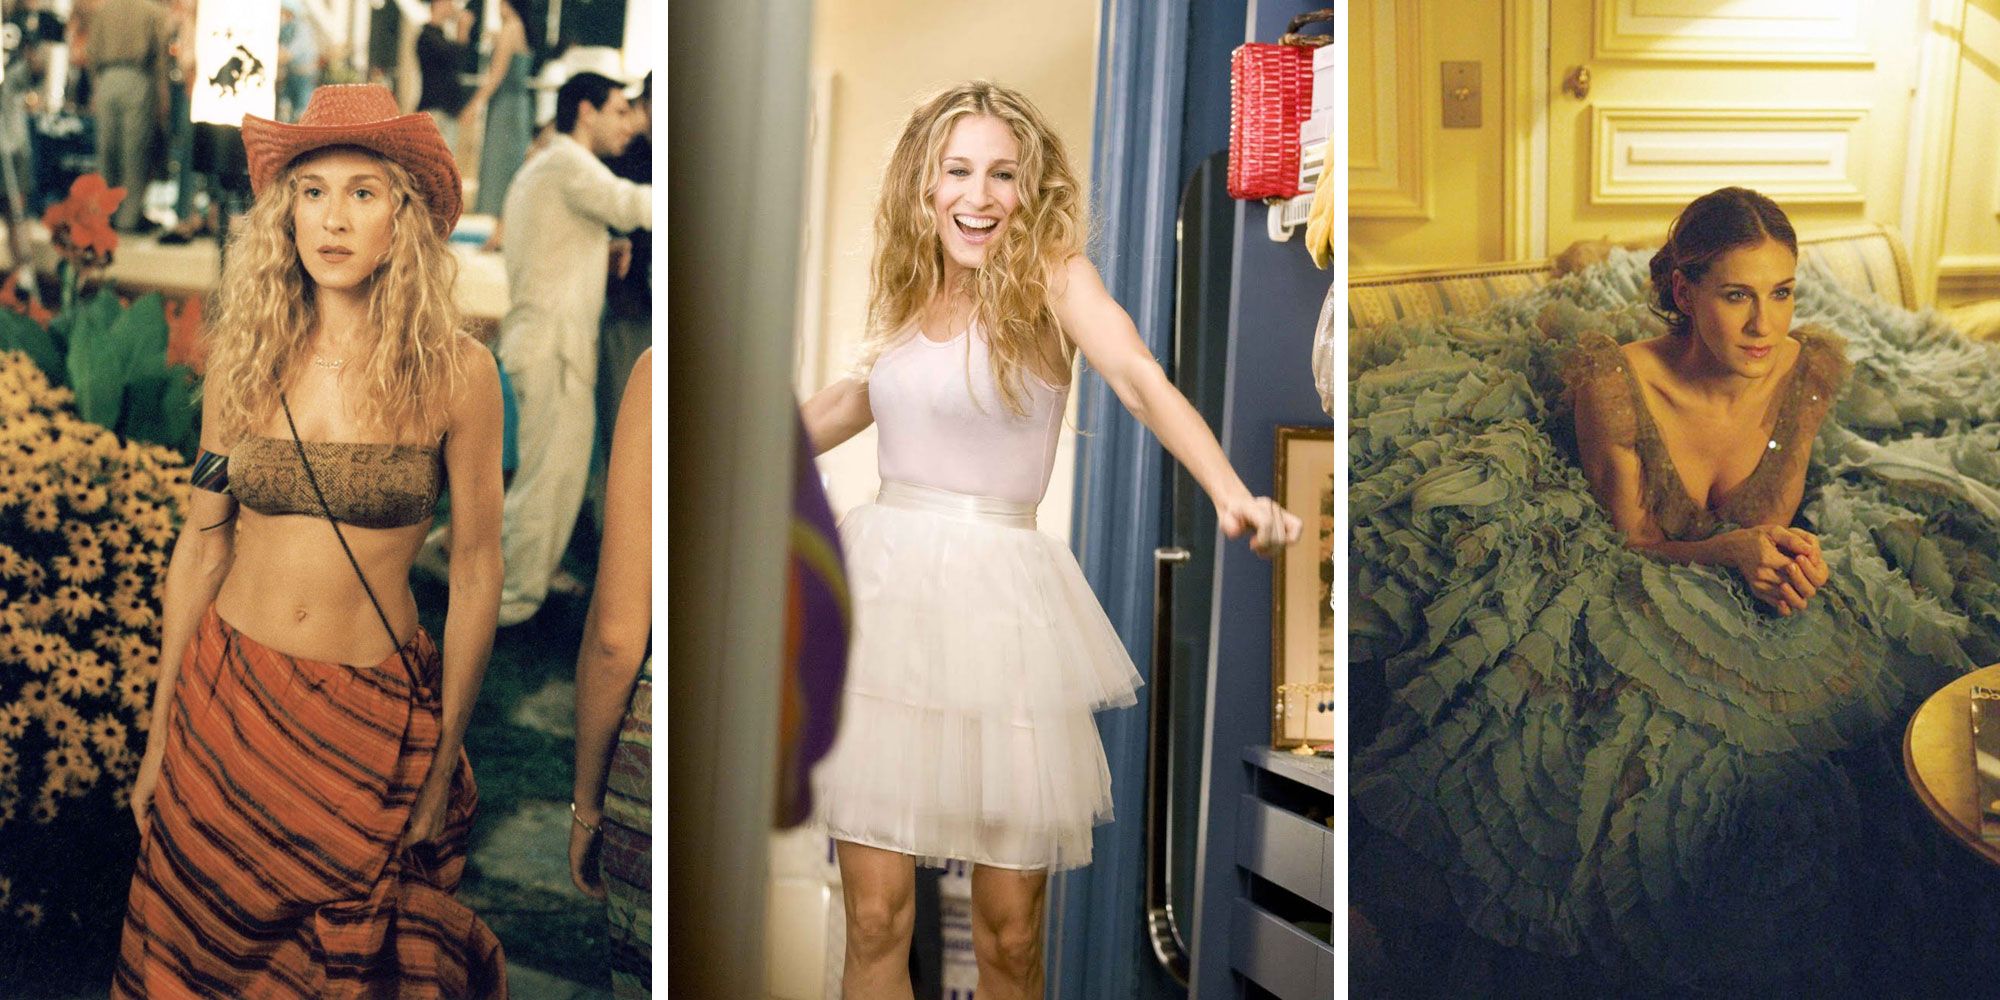 Carrie Bradshaw Fashion Moments - Best Carrie Bradshaw Fashion Moments on  Sex and the City